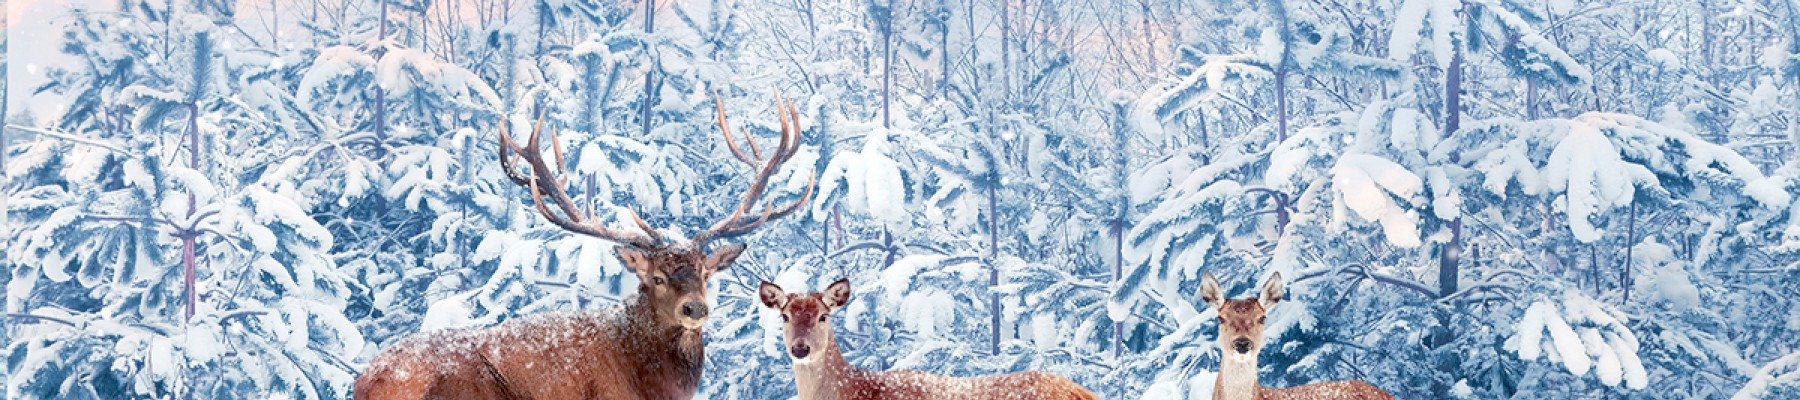 The image shows three deer standing in a snowy forest with snow-covered trees in the background and a colorful, cloudy sky above.